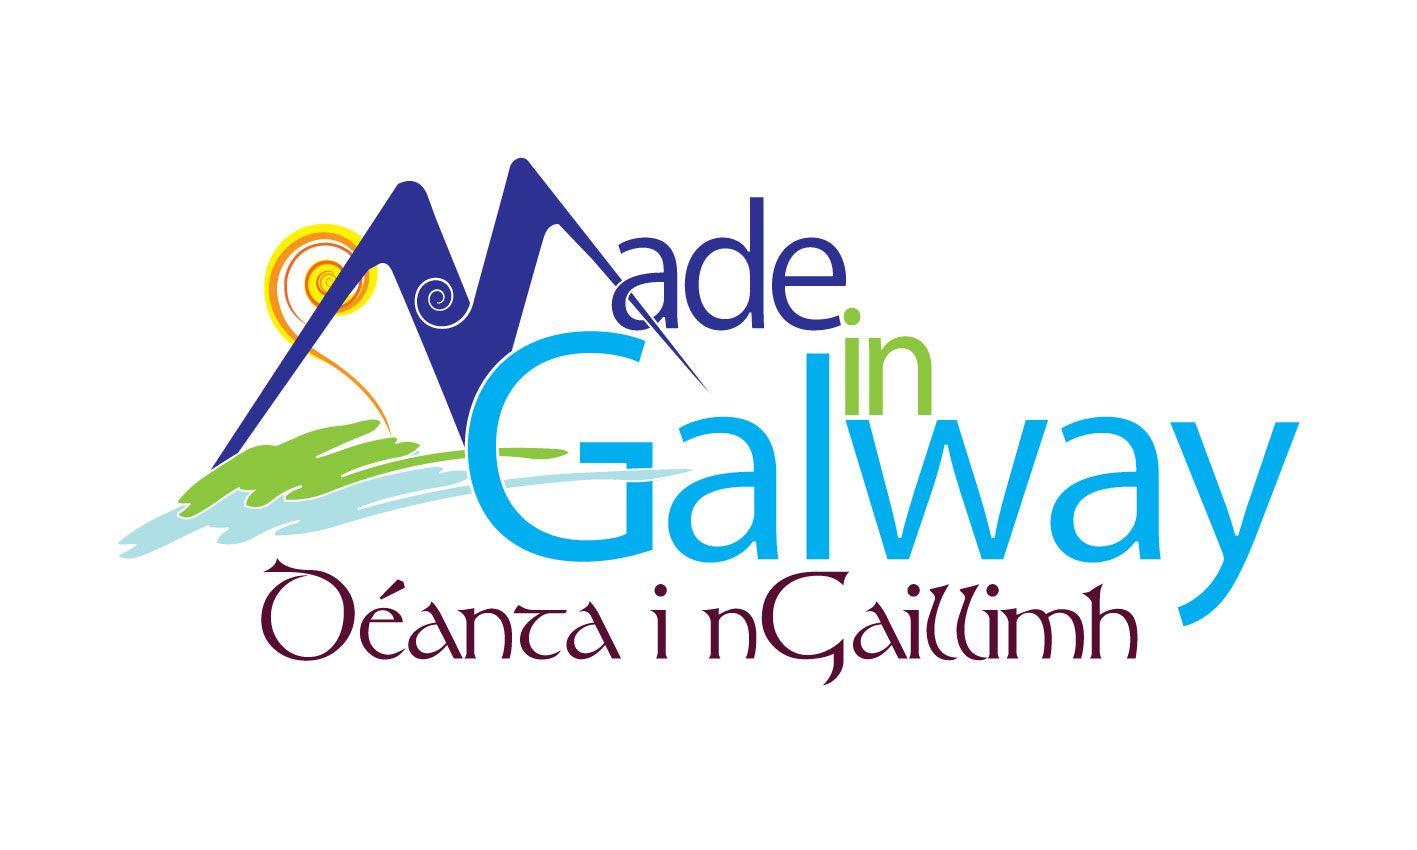 Galway Logo - Galway Gastronomy. Made in Galway